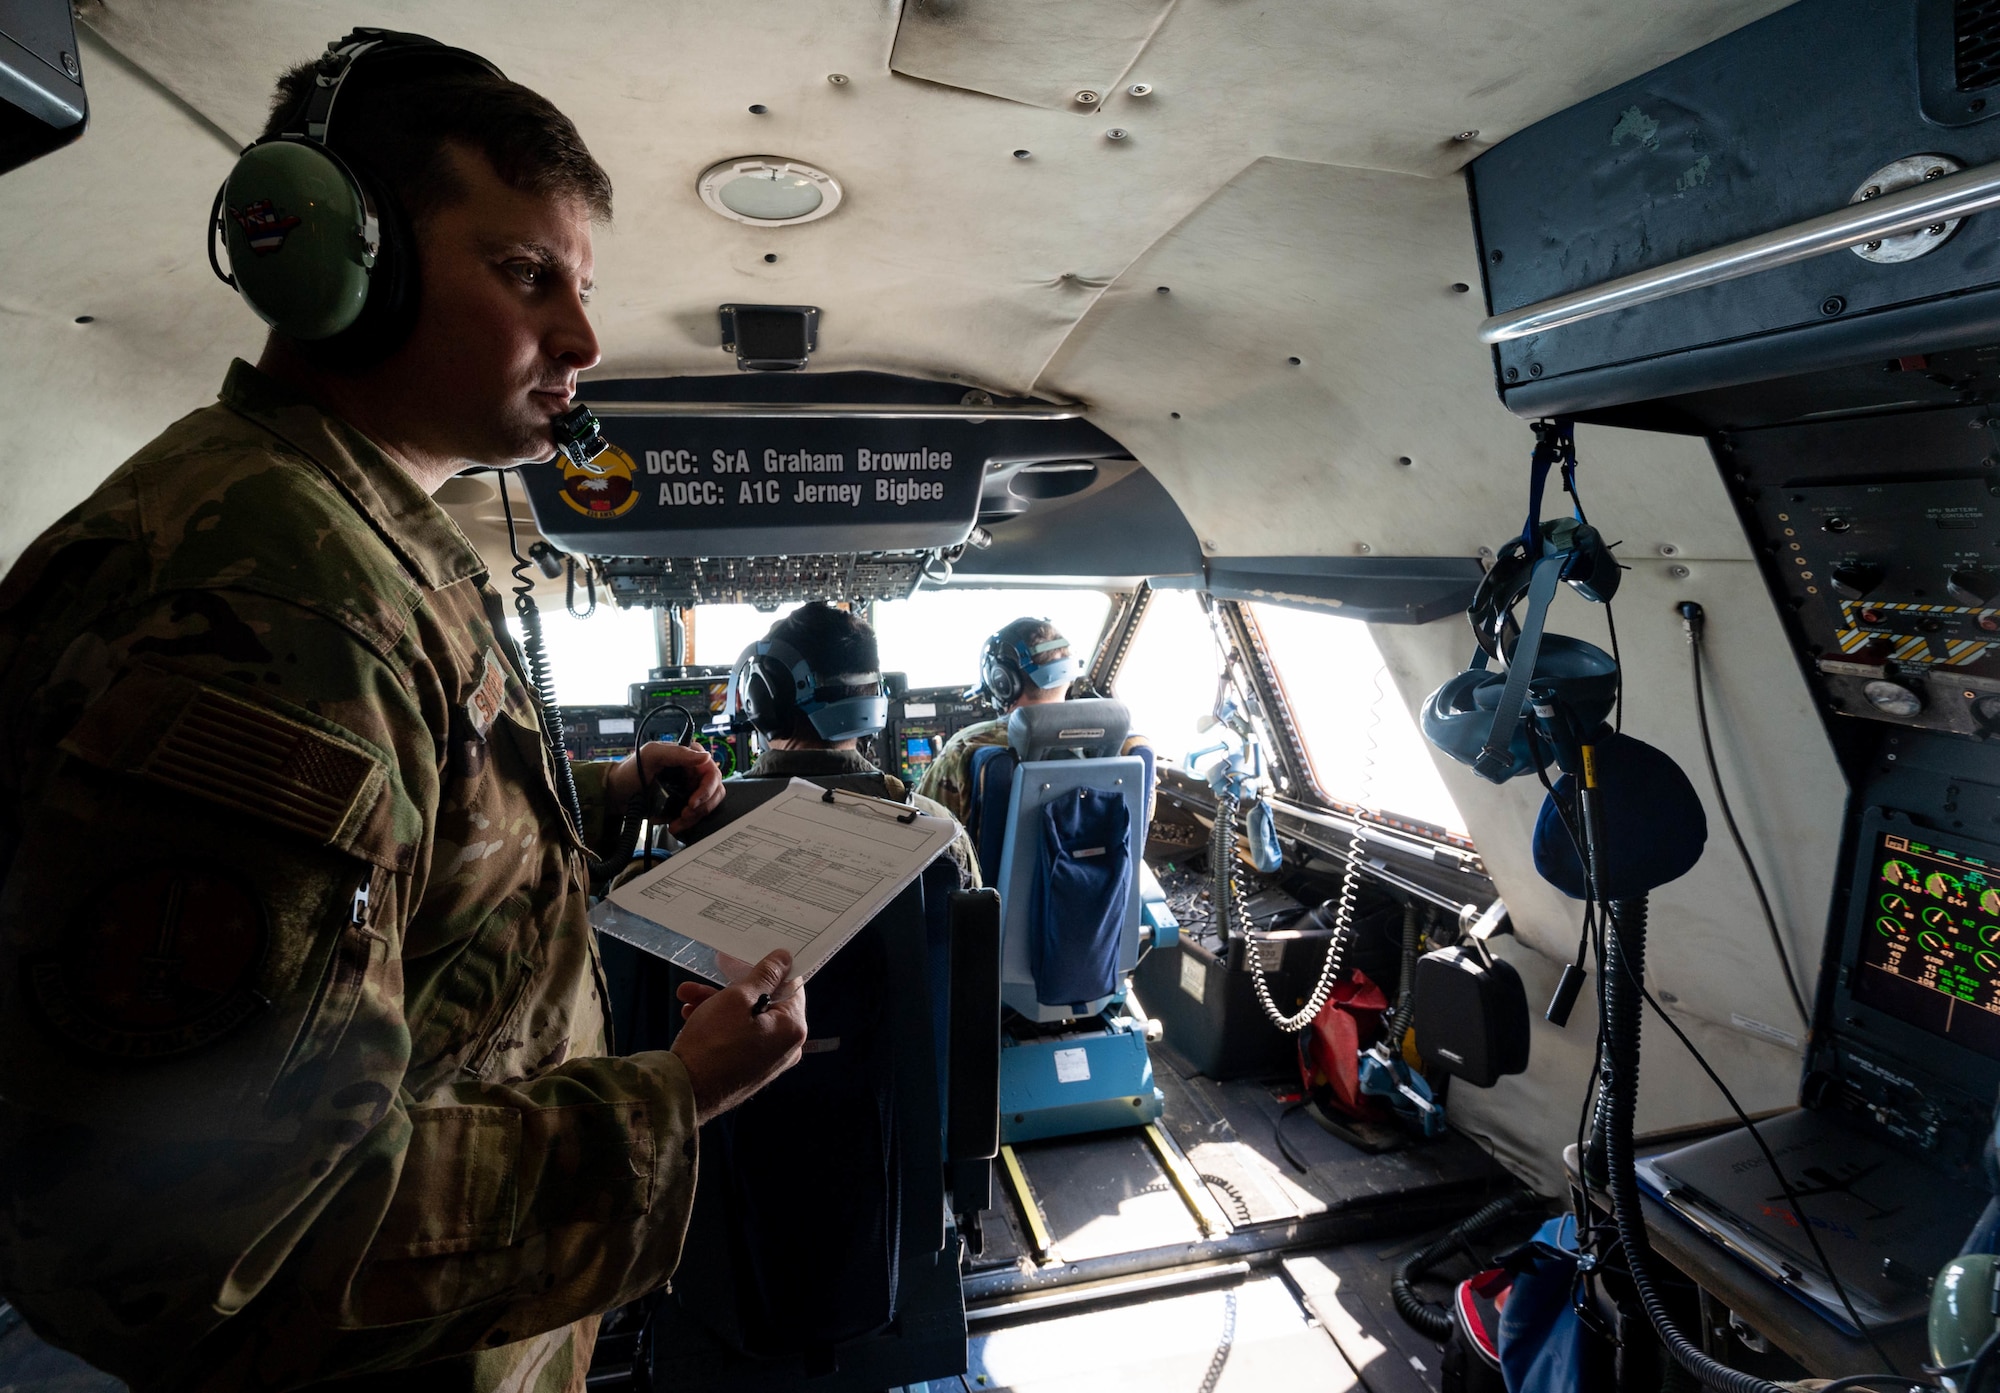 Maj. John Smyrski, Air Mobility Command Test and Evaluation Squadron test director, observes 9th Airlift Squadron aircrew members during a 358 Quick Don Demist oxygen mask training flight, June 15, 2021. The 9th AS aircrew tested mask modifications for AMC’s test and evaluation team which will assist in determining further modifications. (U.S. Air Force photo by Senior Airman Faith Schaefer)